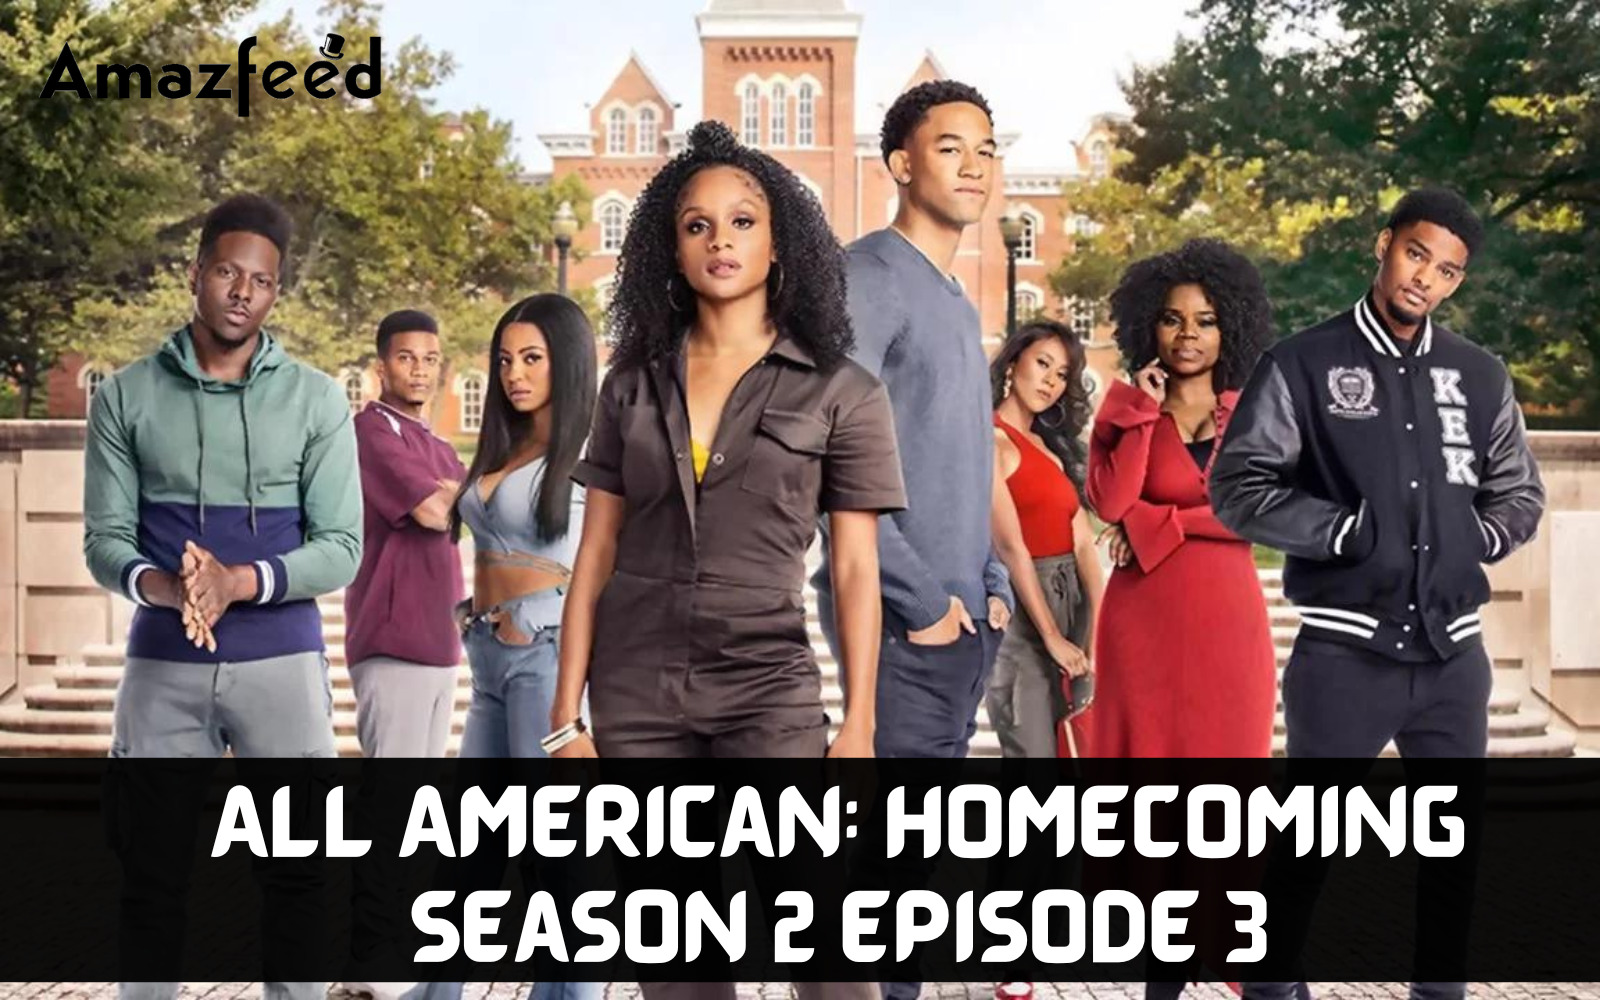 When Is All American Homecoming season 2 Episode 3 Coming Out (Release Date)